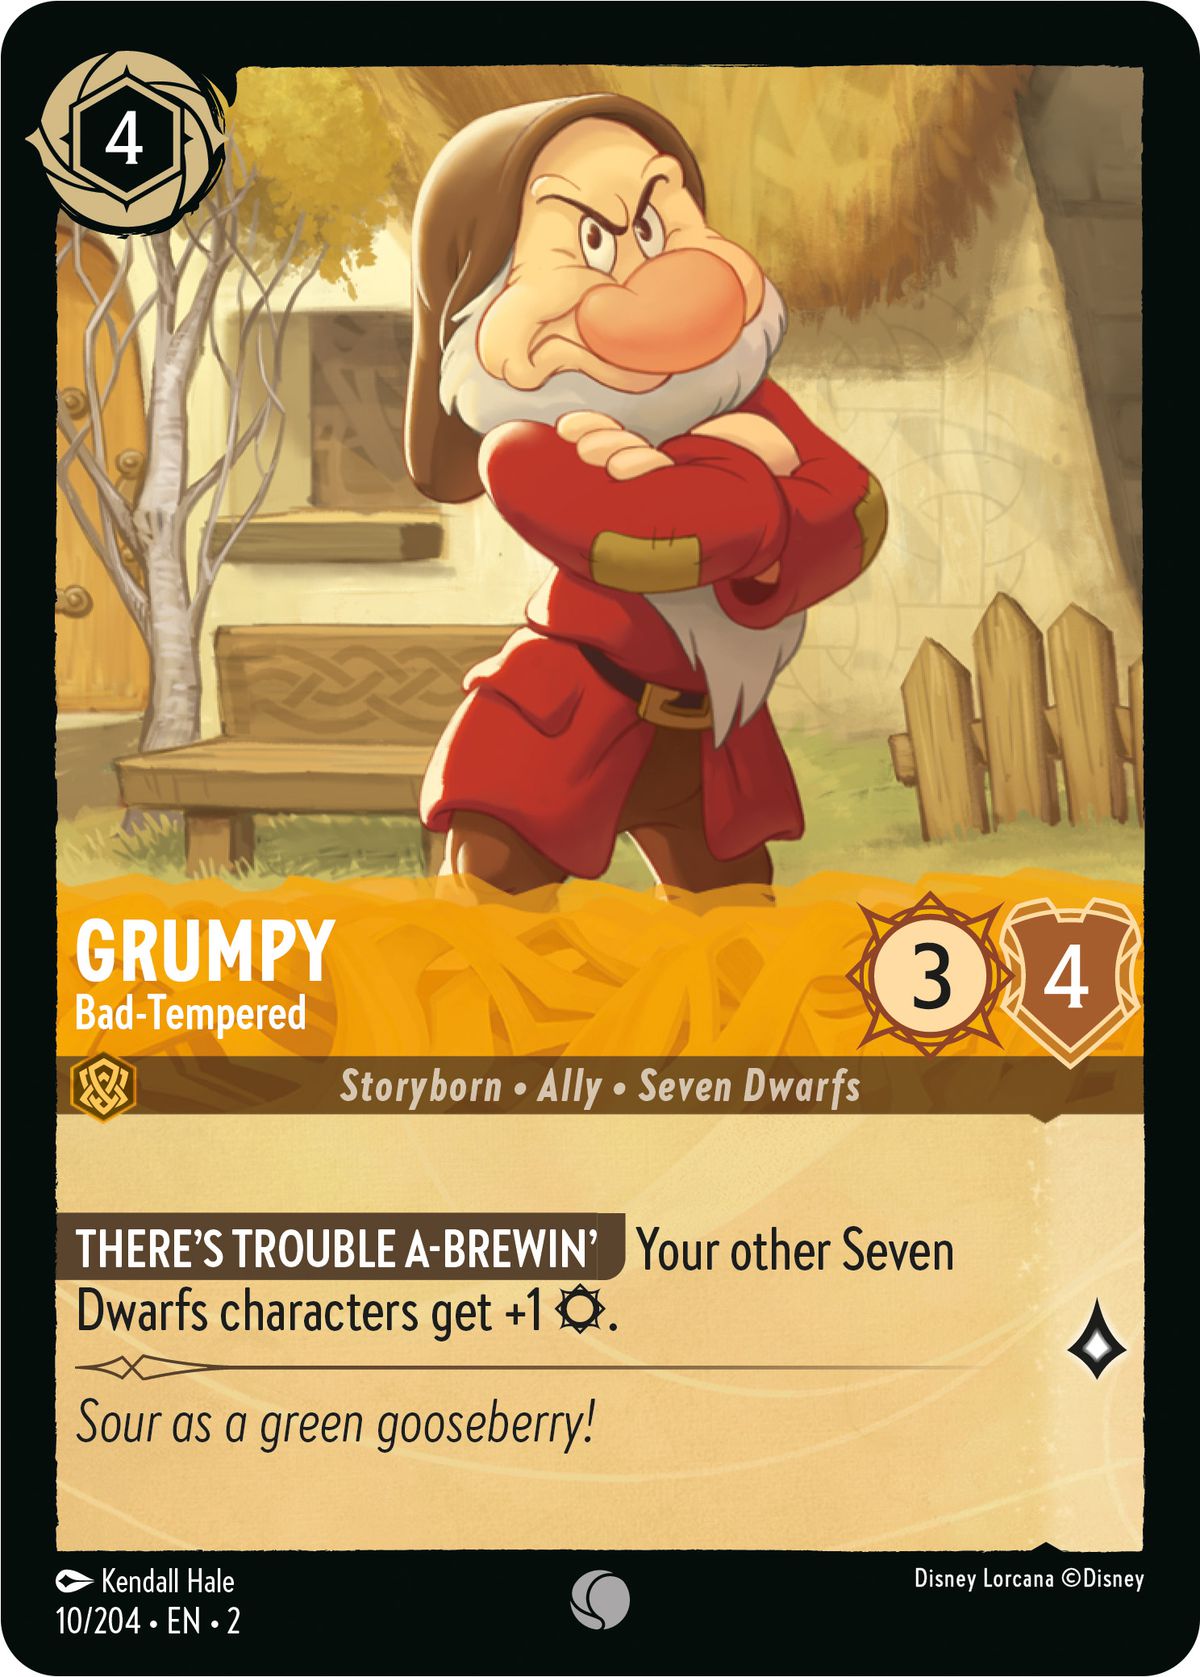 Grumpy, Bad-Tempered is a 3, 4 seven dwarfs character that adds one attack to each other dwarf.